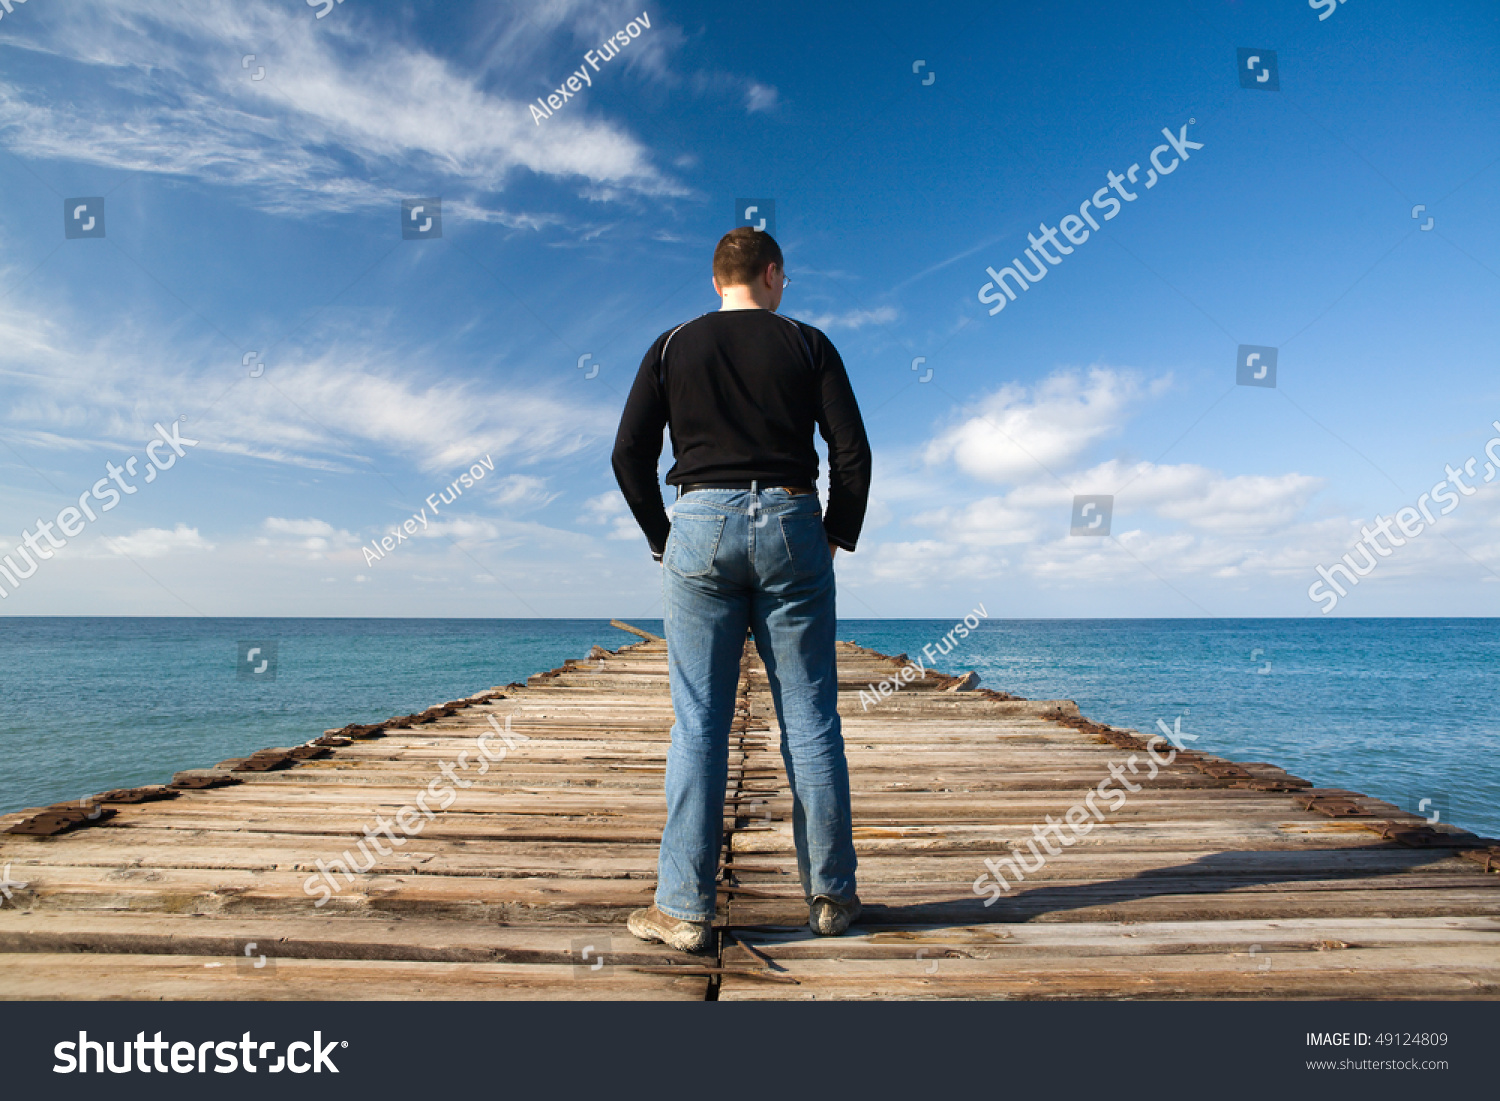 Man Standing At Pier And Looking At The Sea Stock Photo 49124809 ...